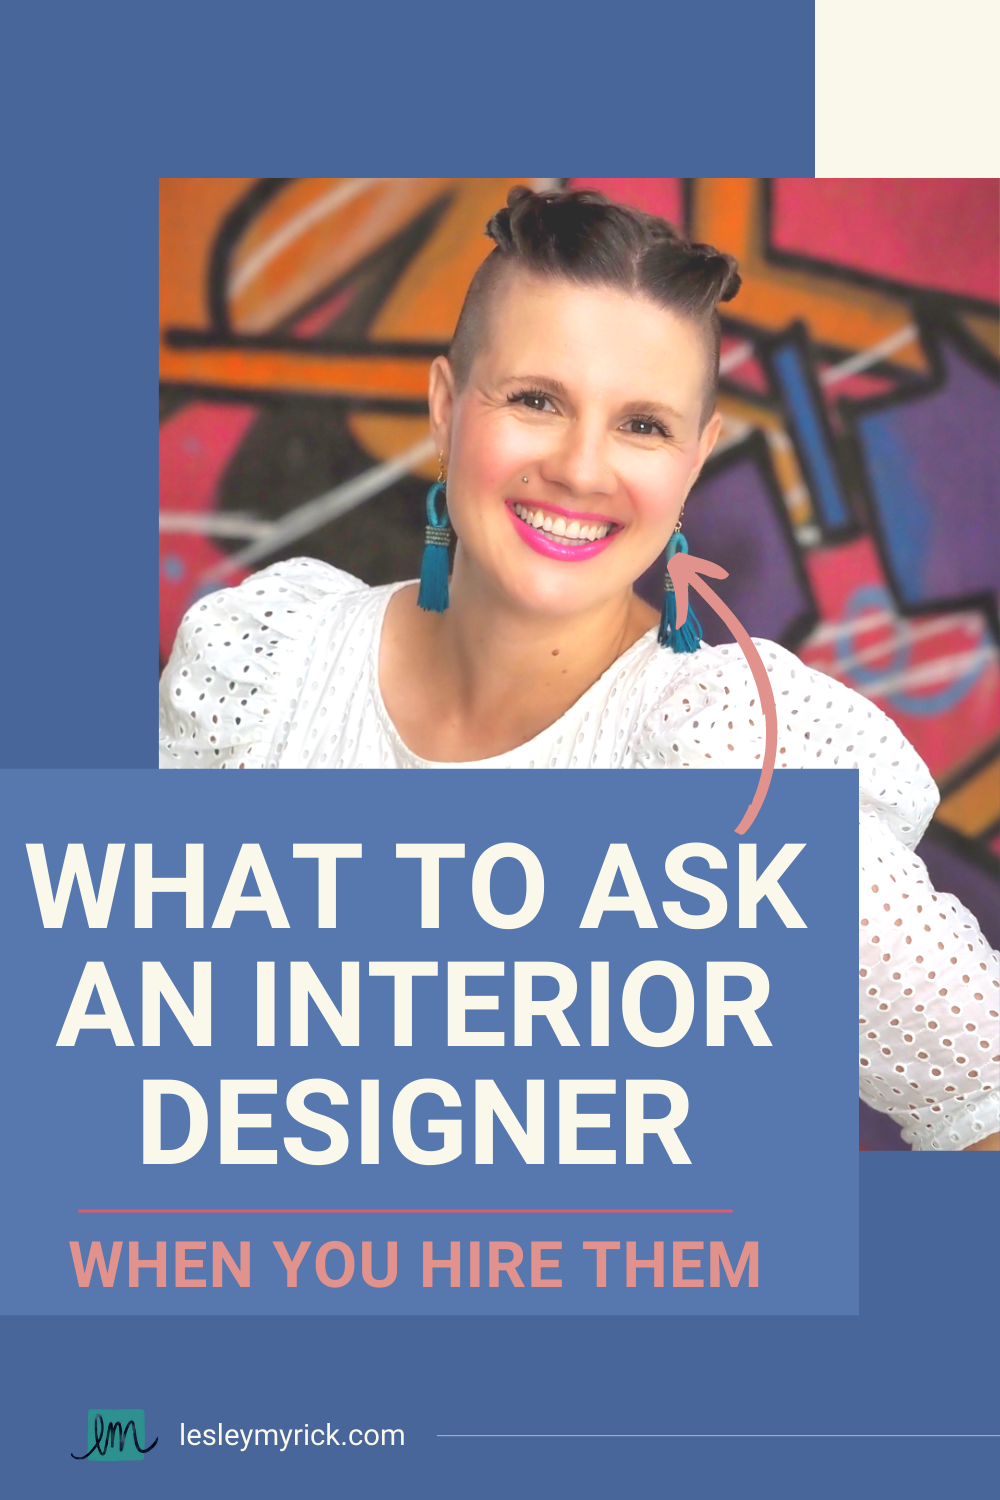 Ready to hire a designer for your new build, home remodel, or decorating refresh? Here's what to ask an interior designer when you hire them.